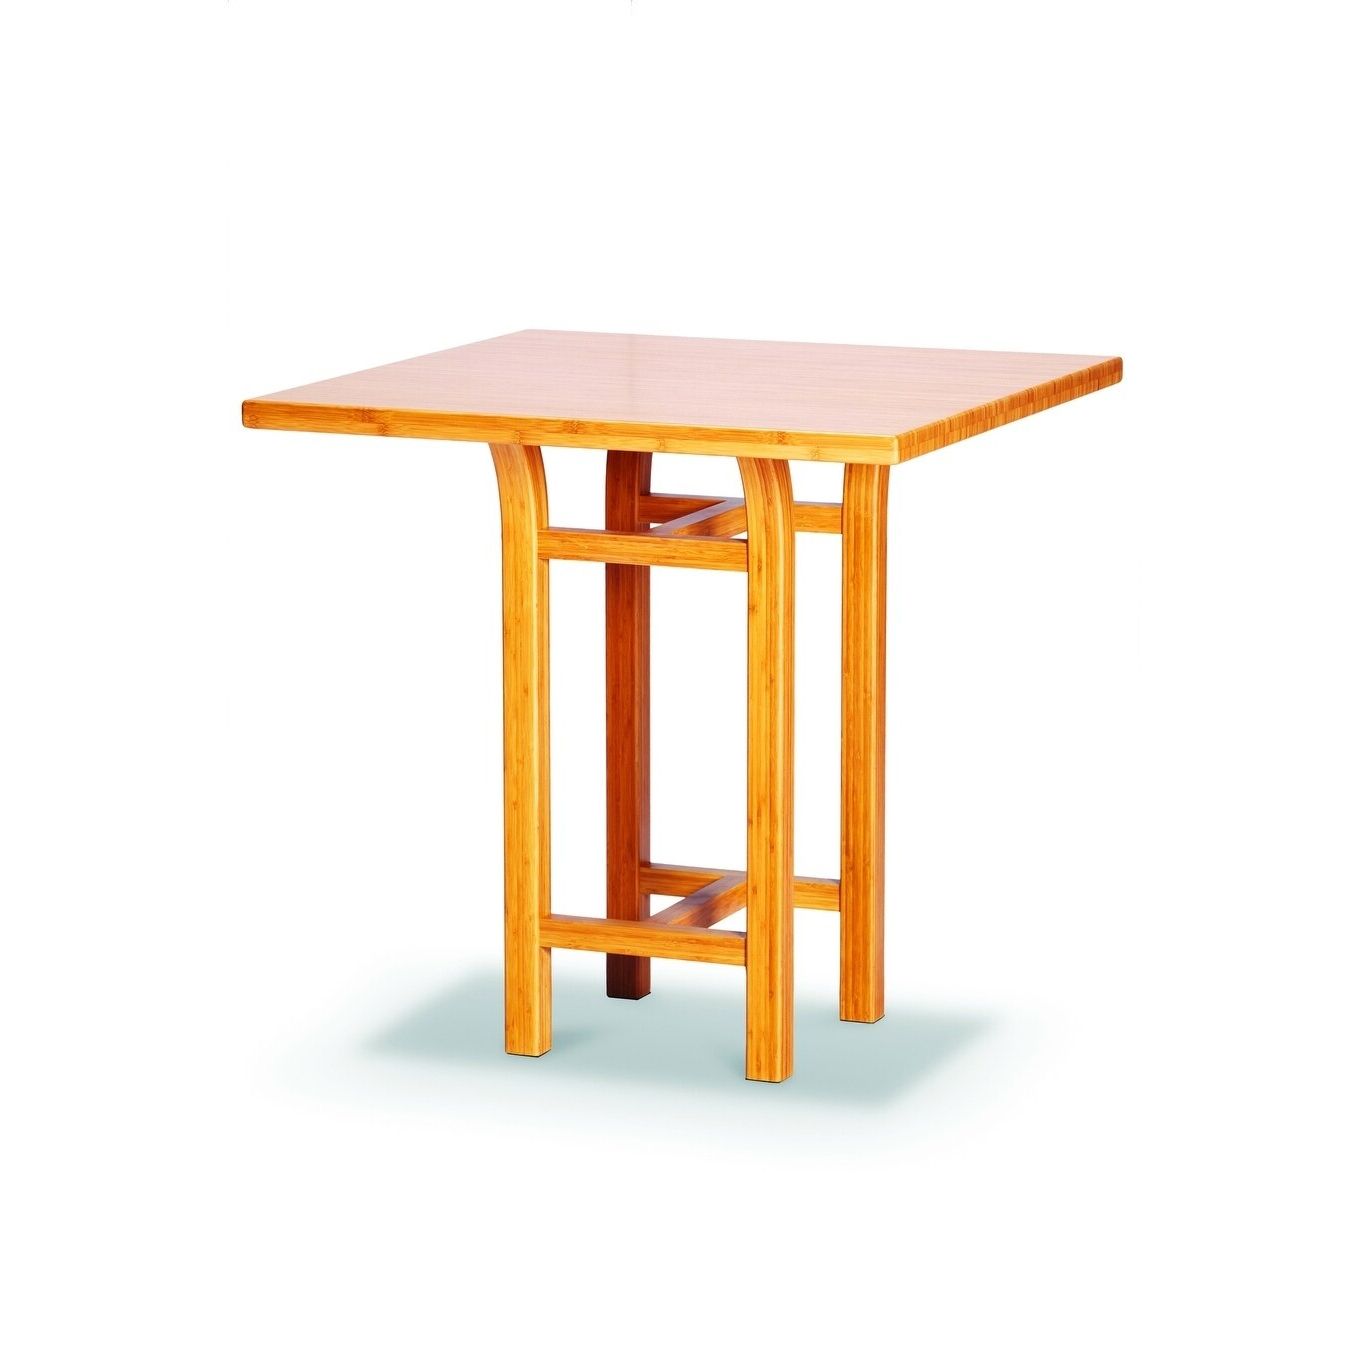 Caramalized Outdoor Tables Pertaining To Well Known Greenington G0018 Tulip Bar Height Table, Caramelized – Overstock –  (View 5 of 15)